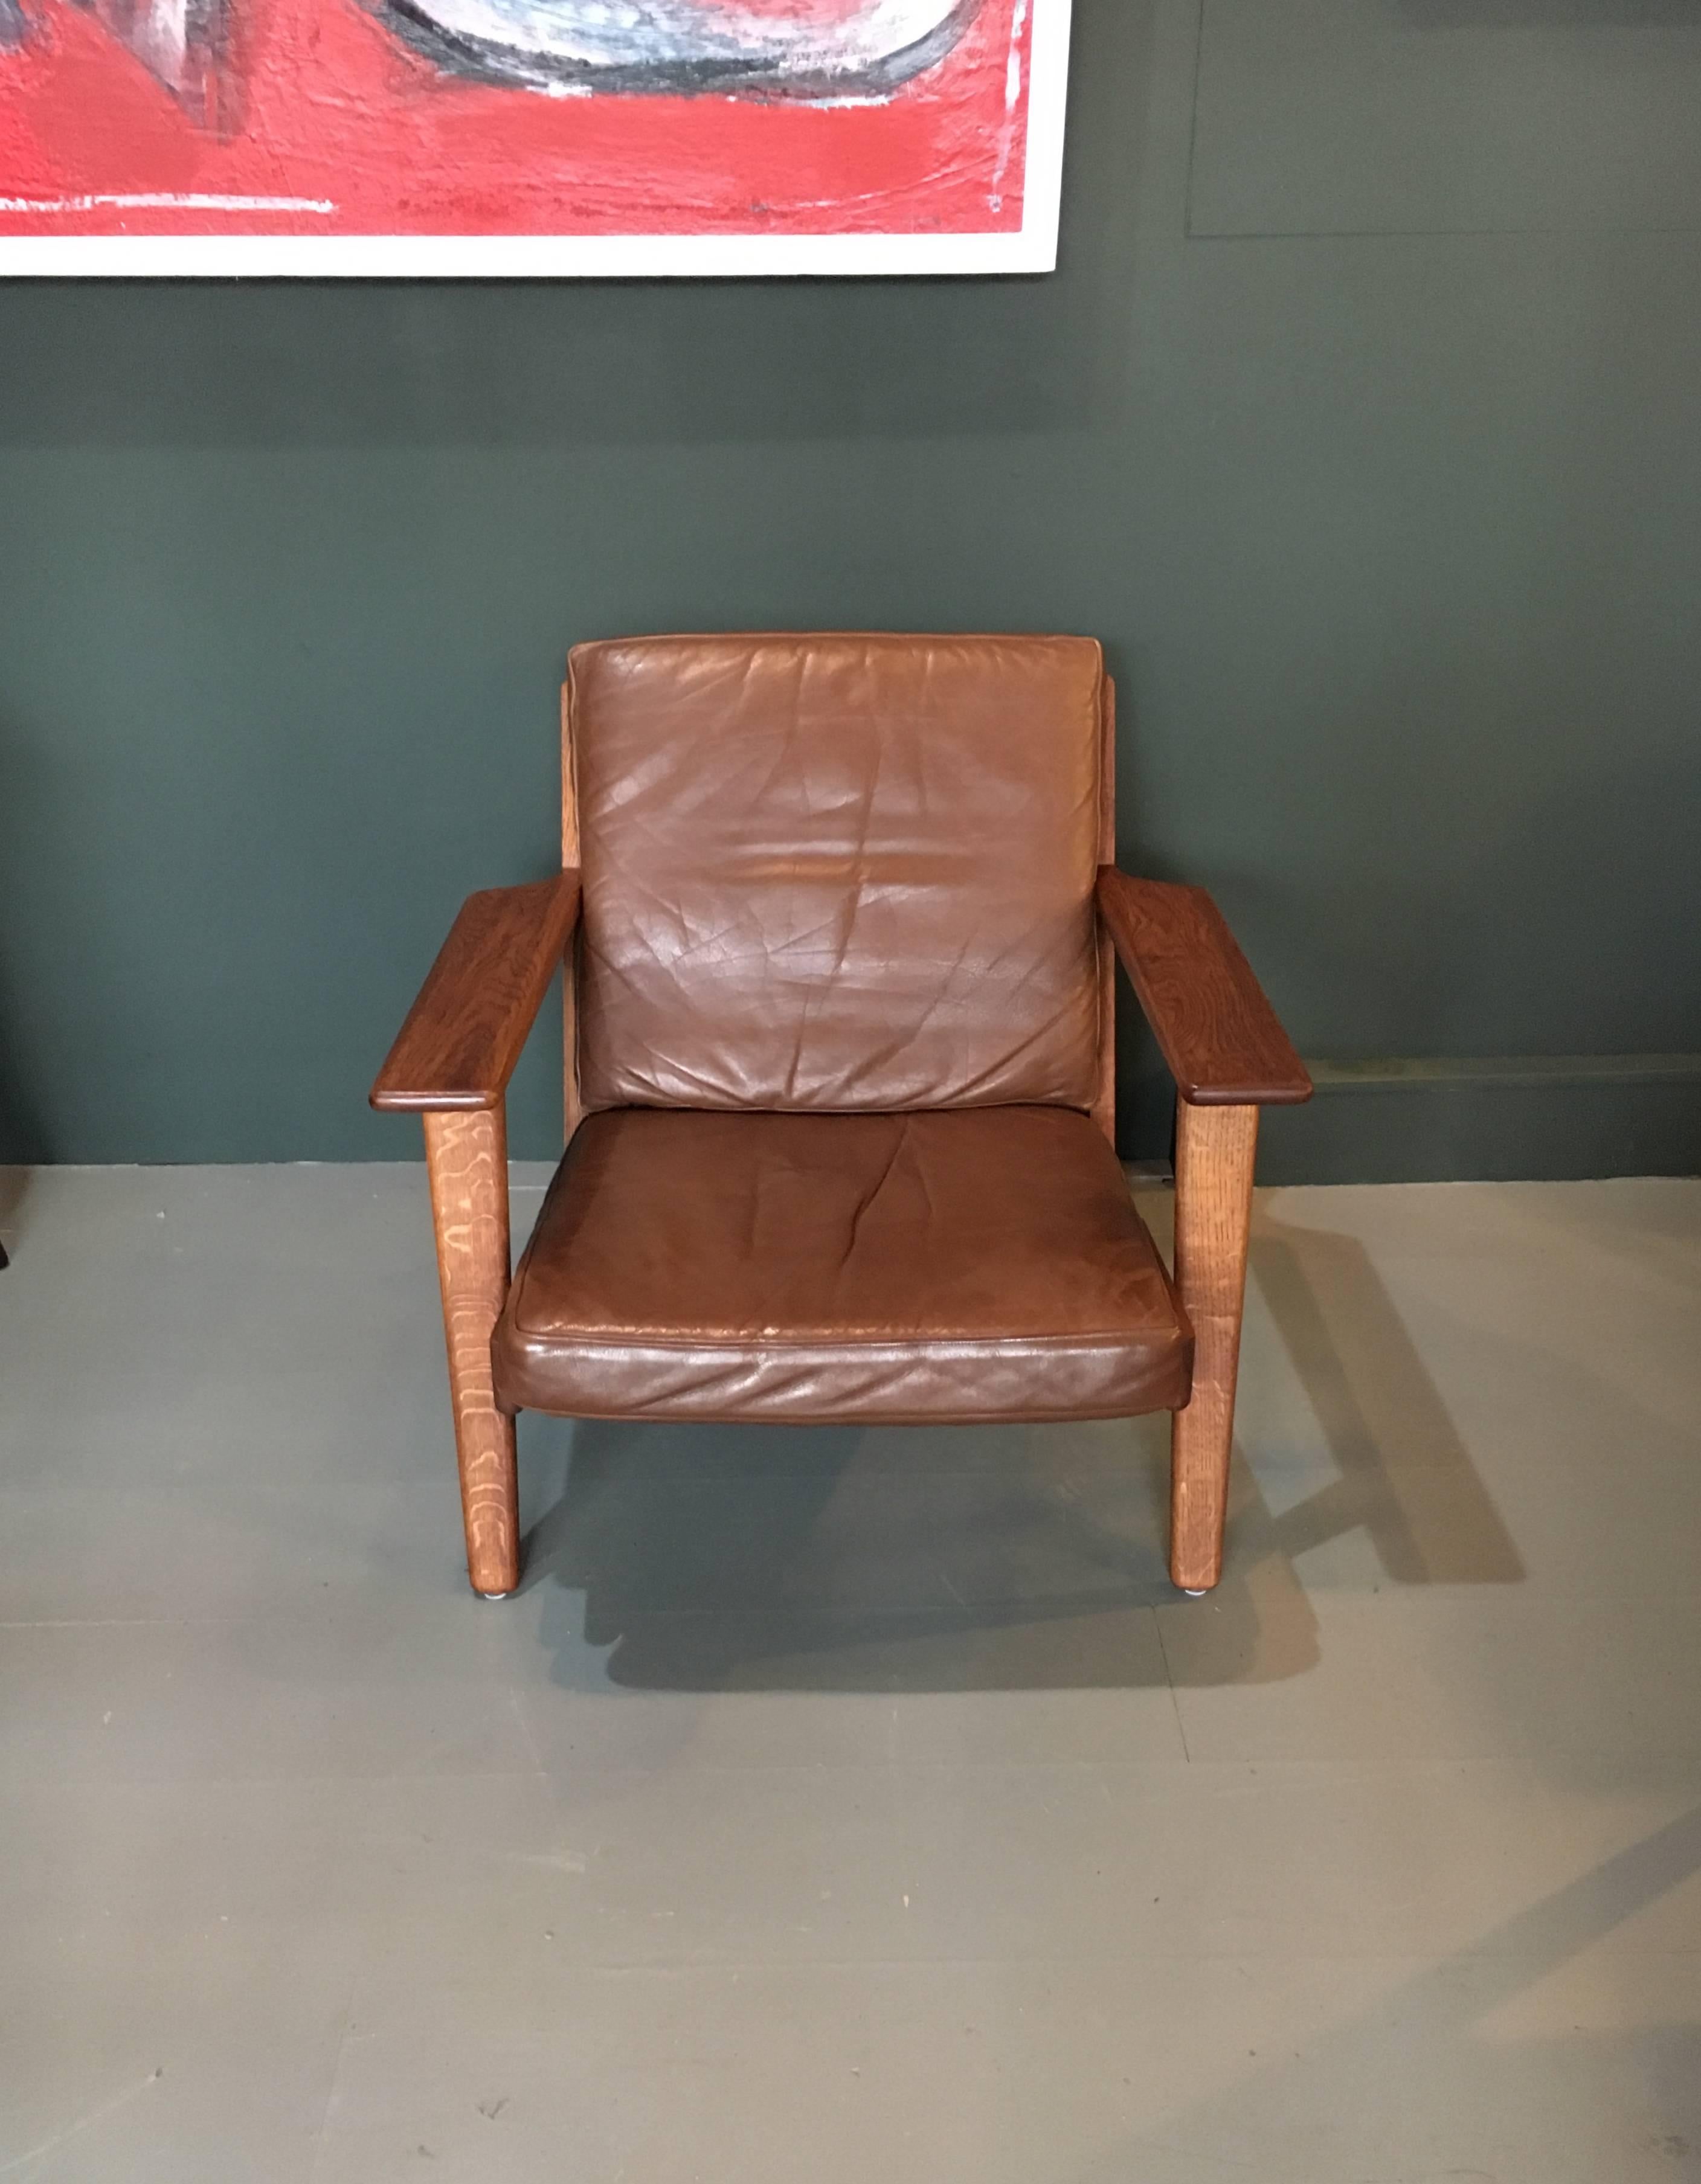 The Classic GE290 lounge chair by Danish master designer Hans J Wegner. These are original, 1950s models (several available) from GETAMA, Denmark. Sympathetically refurbished European oak frames with original leather upholstery - however, we do